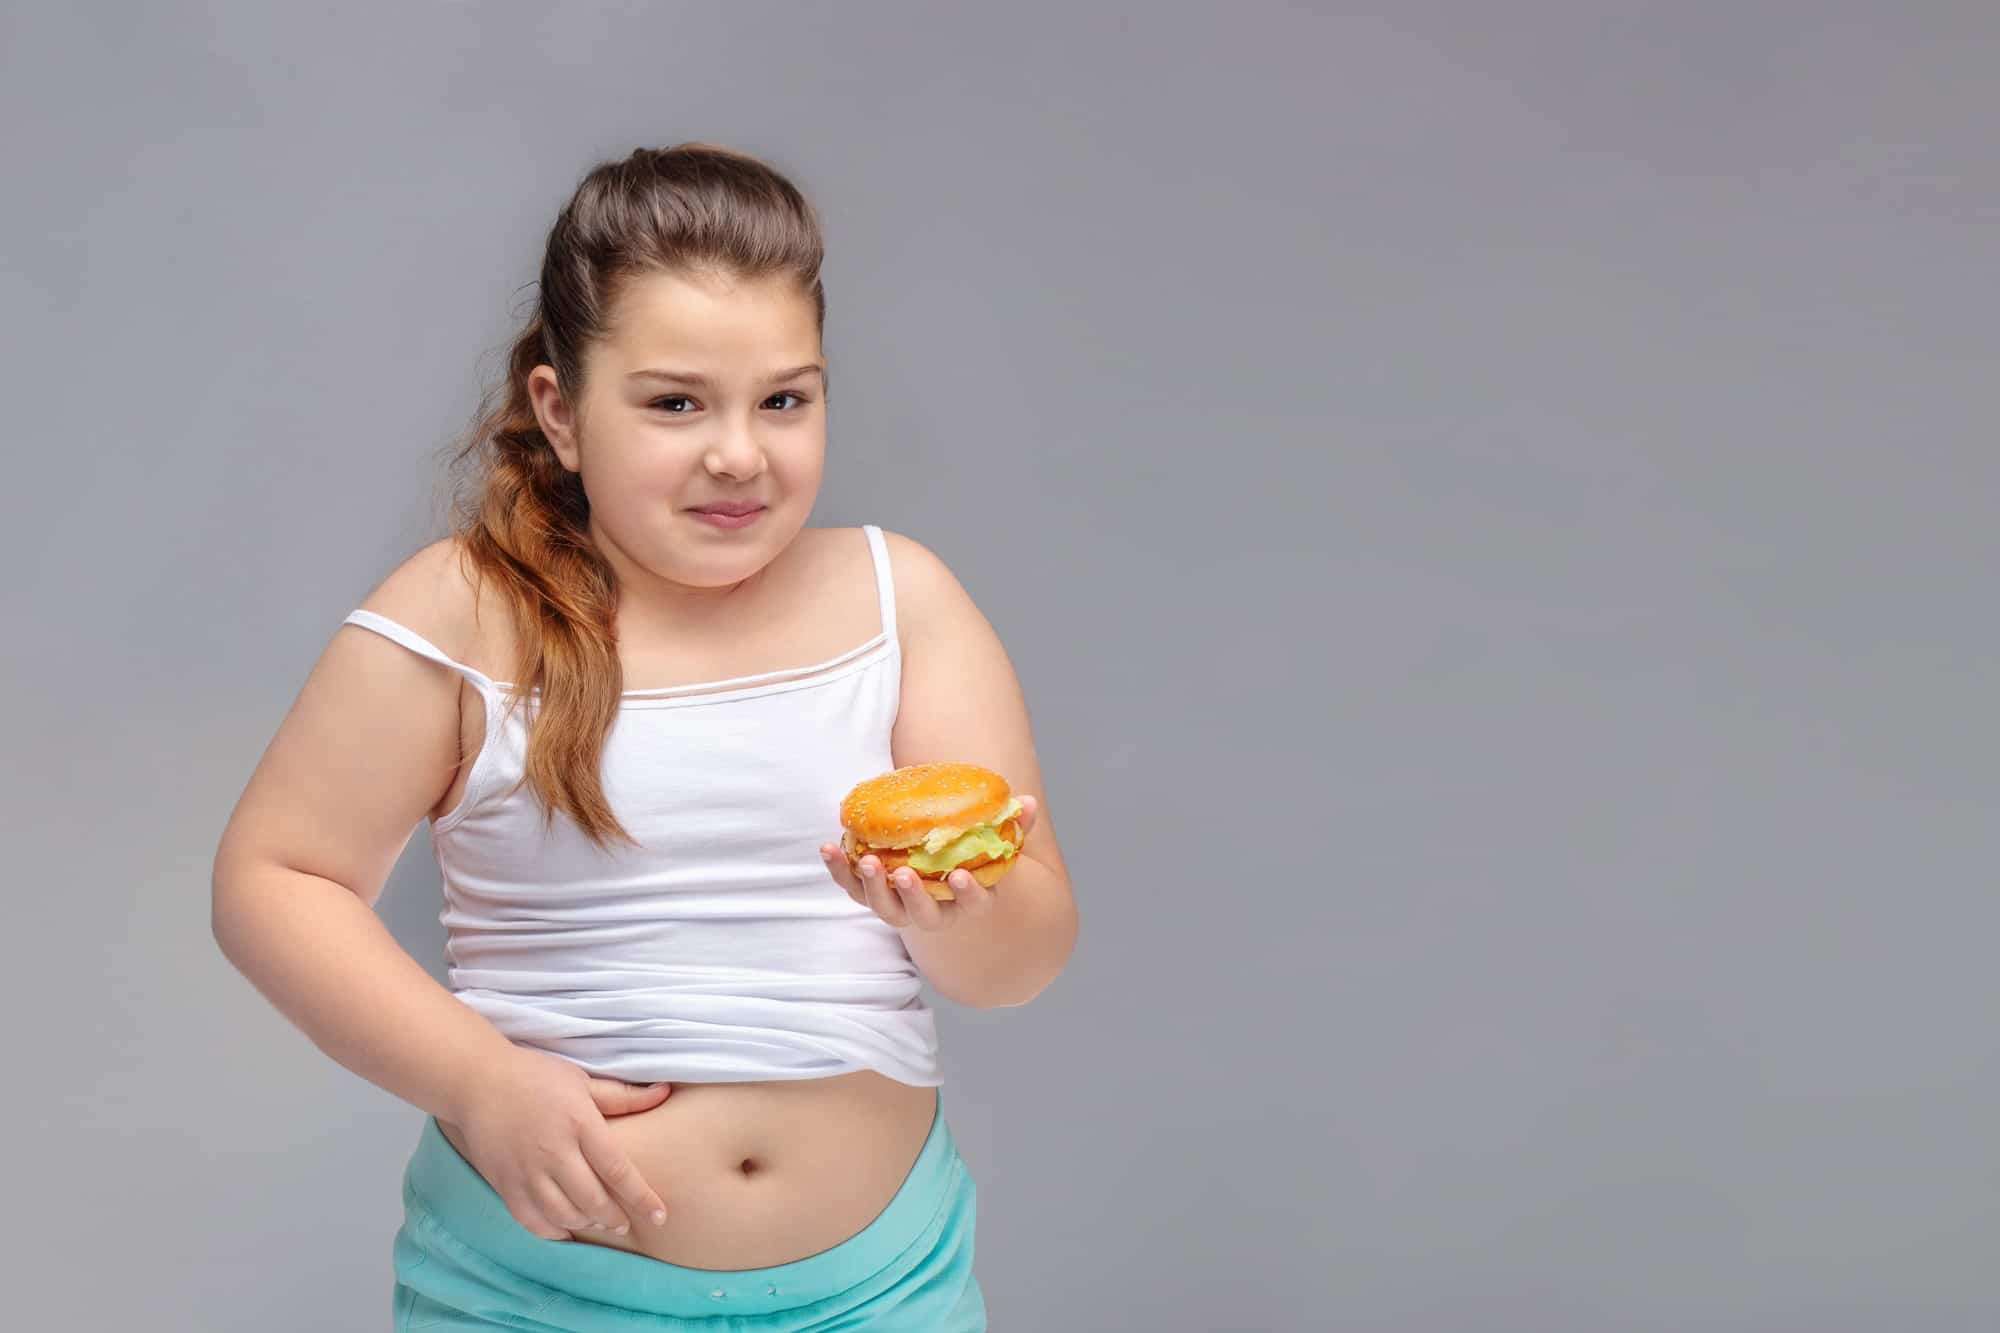 Is your child overweight? Here’s how to wisely help him lose weight